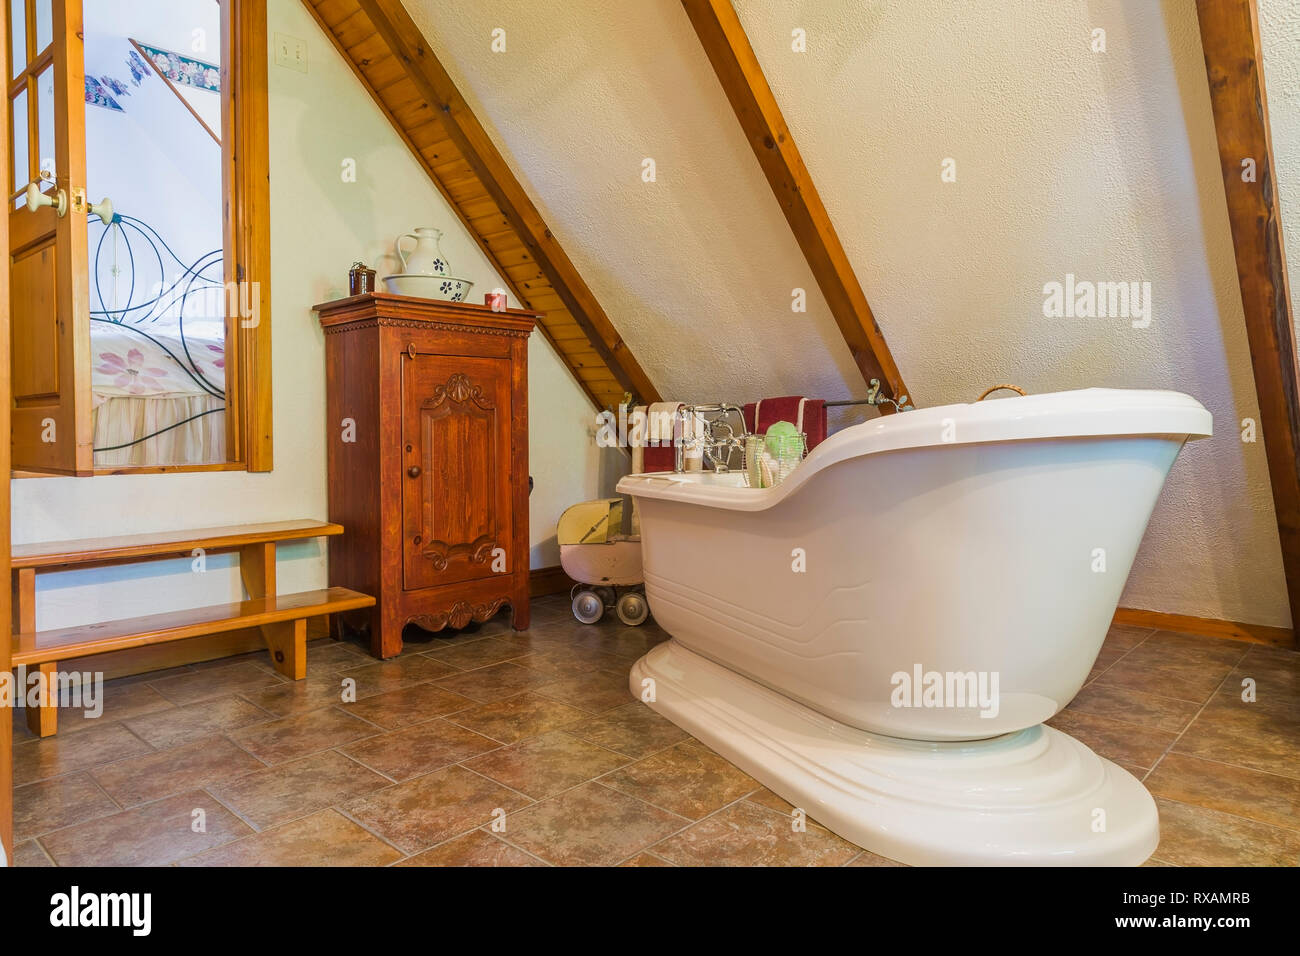 White freestanding Alcove bathtub with small wooden armoire in en suite on upstairs floor inside an old 1927 Canadiana cottage style home, Quebec, Canada. This image is property released. CUPR0321 Stock Photo